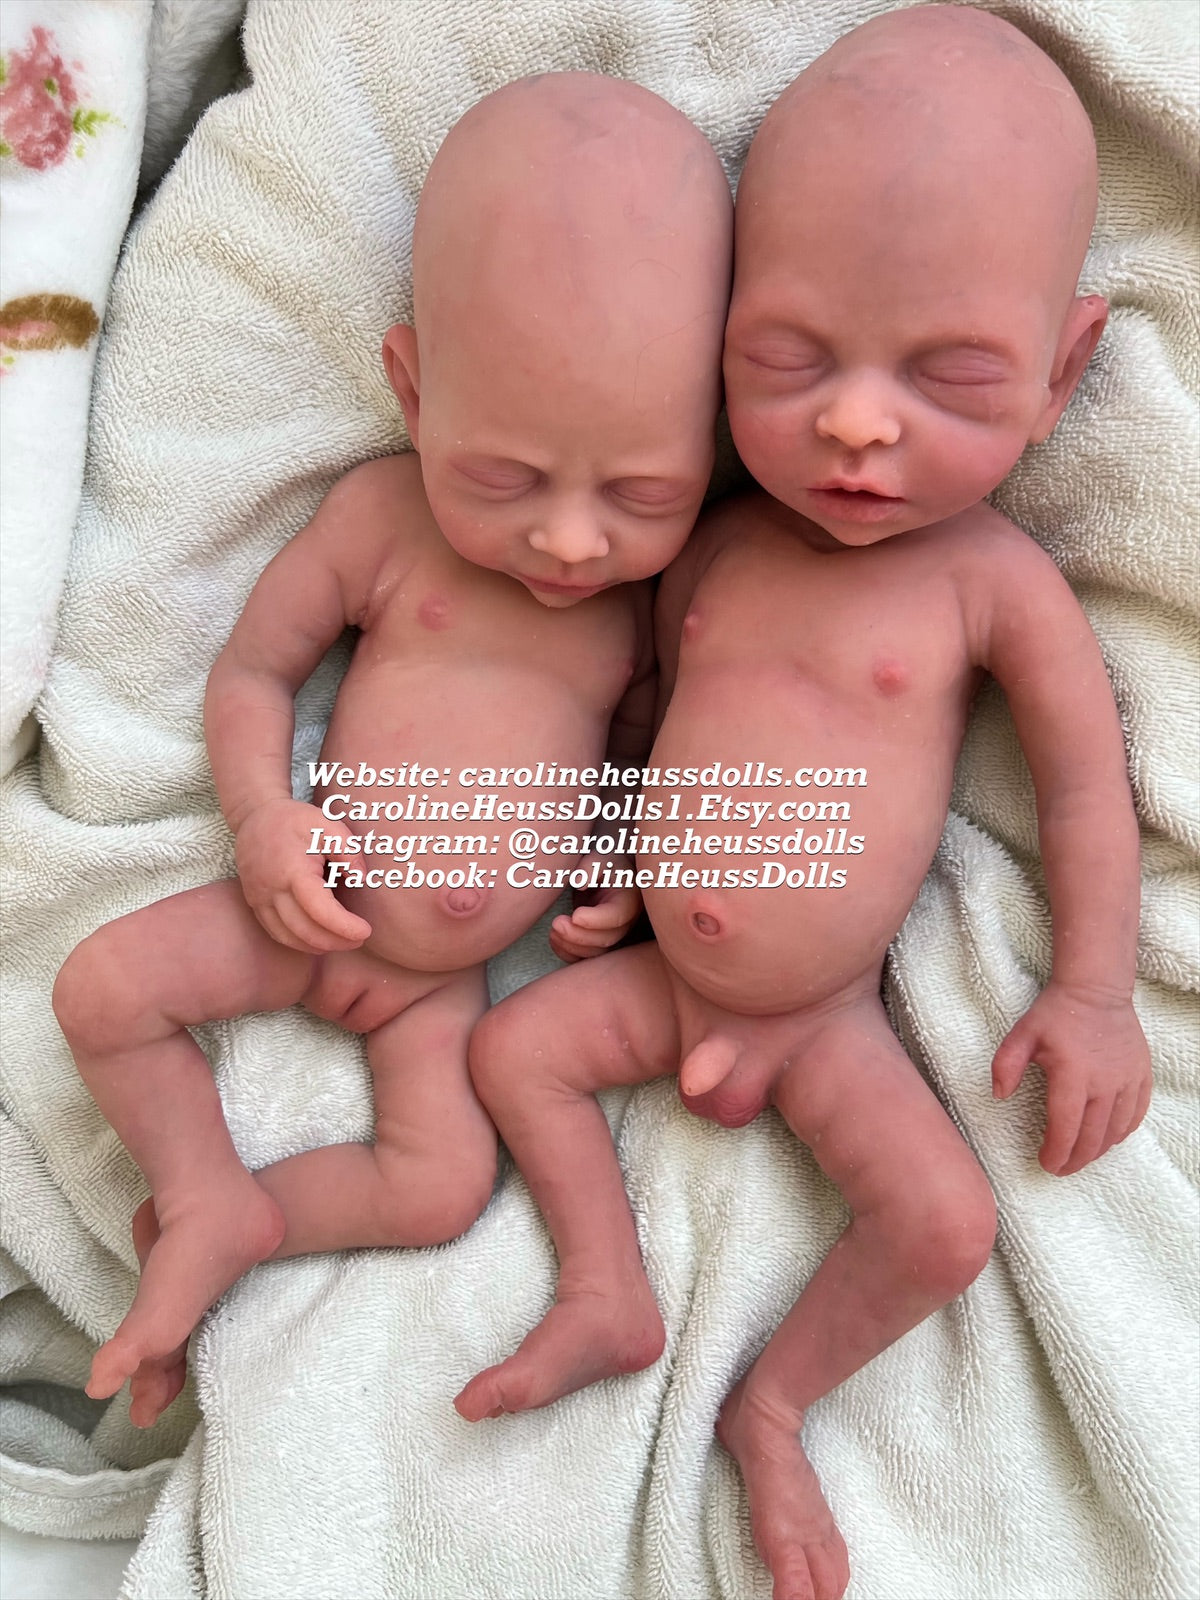 Customizable Twins, Full body solid silicone preemie reborn baby dolls, River & Ranger, layaway available.